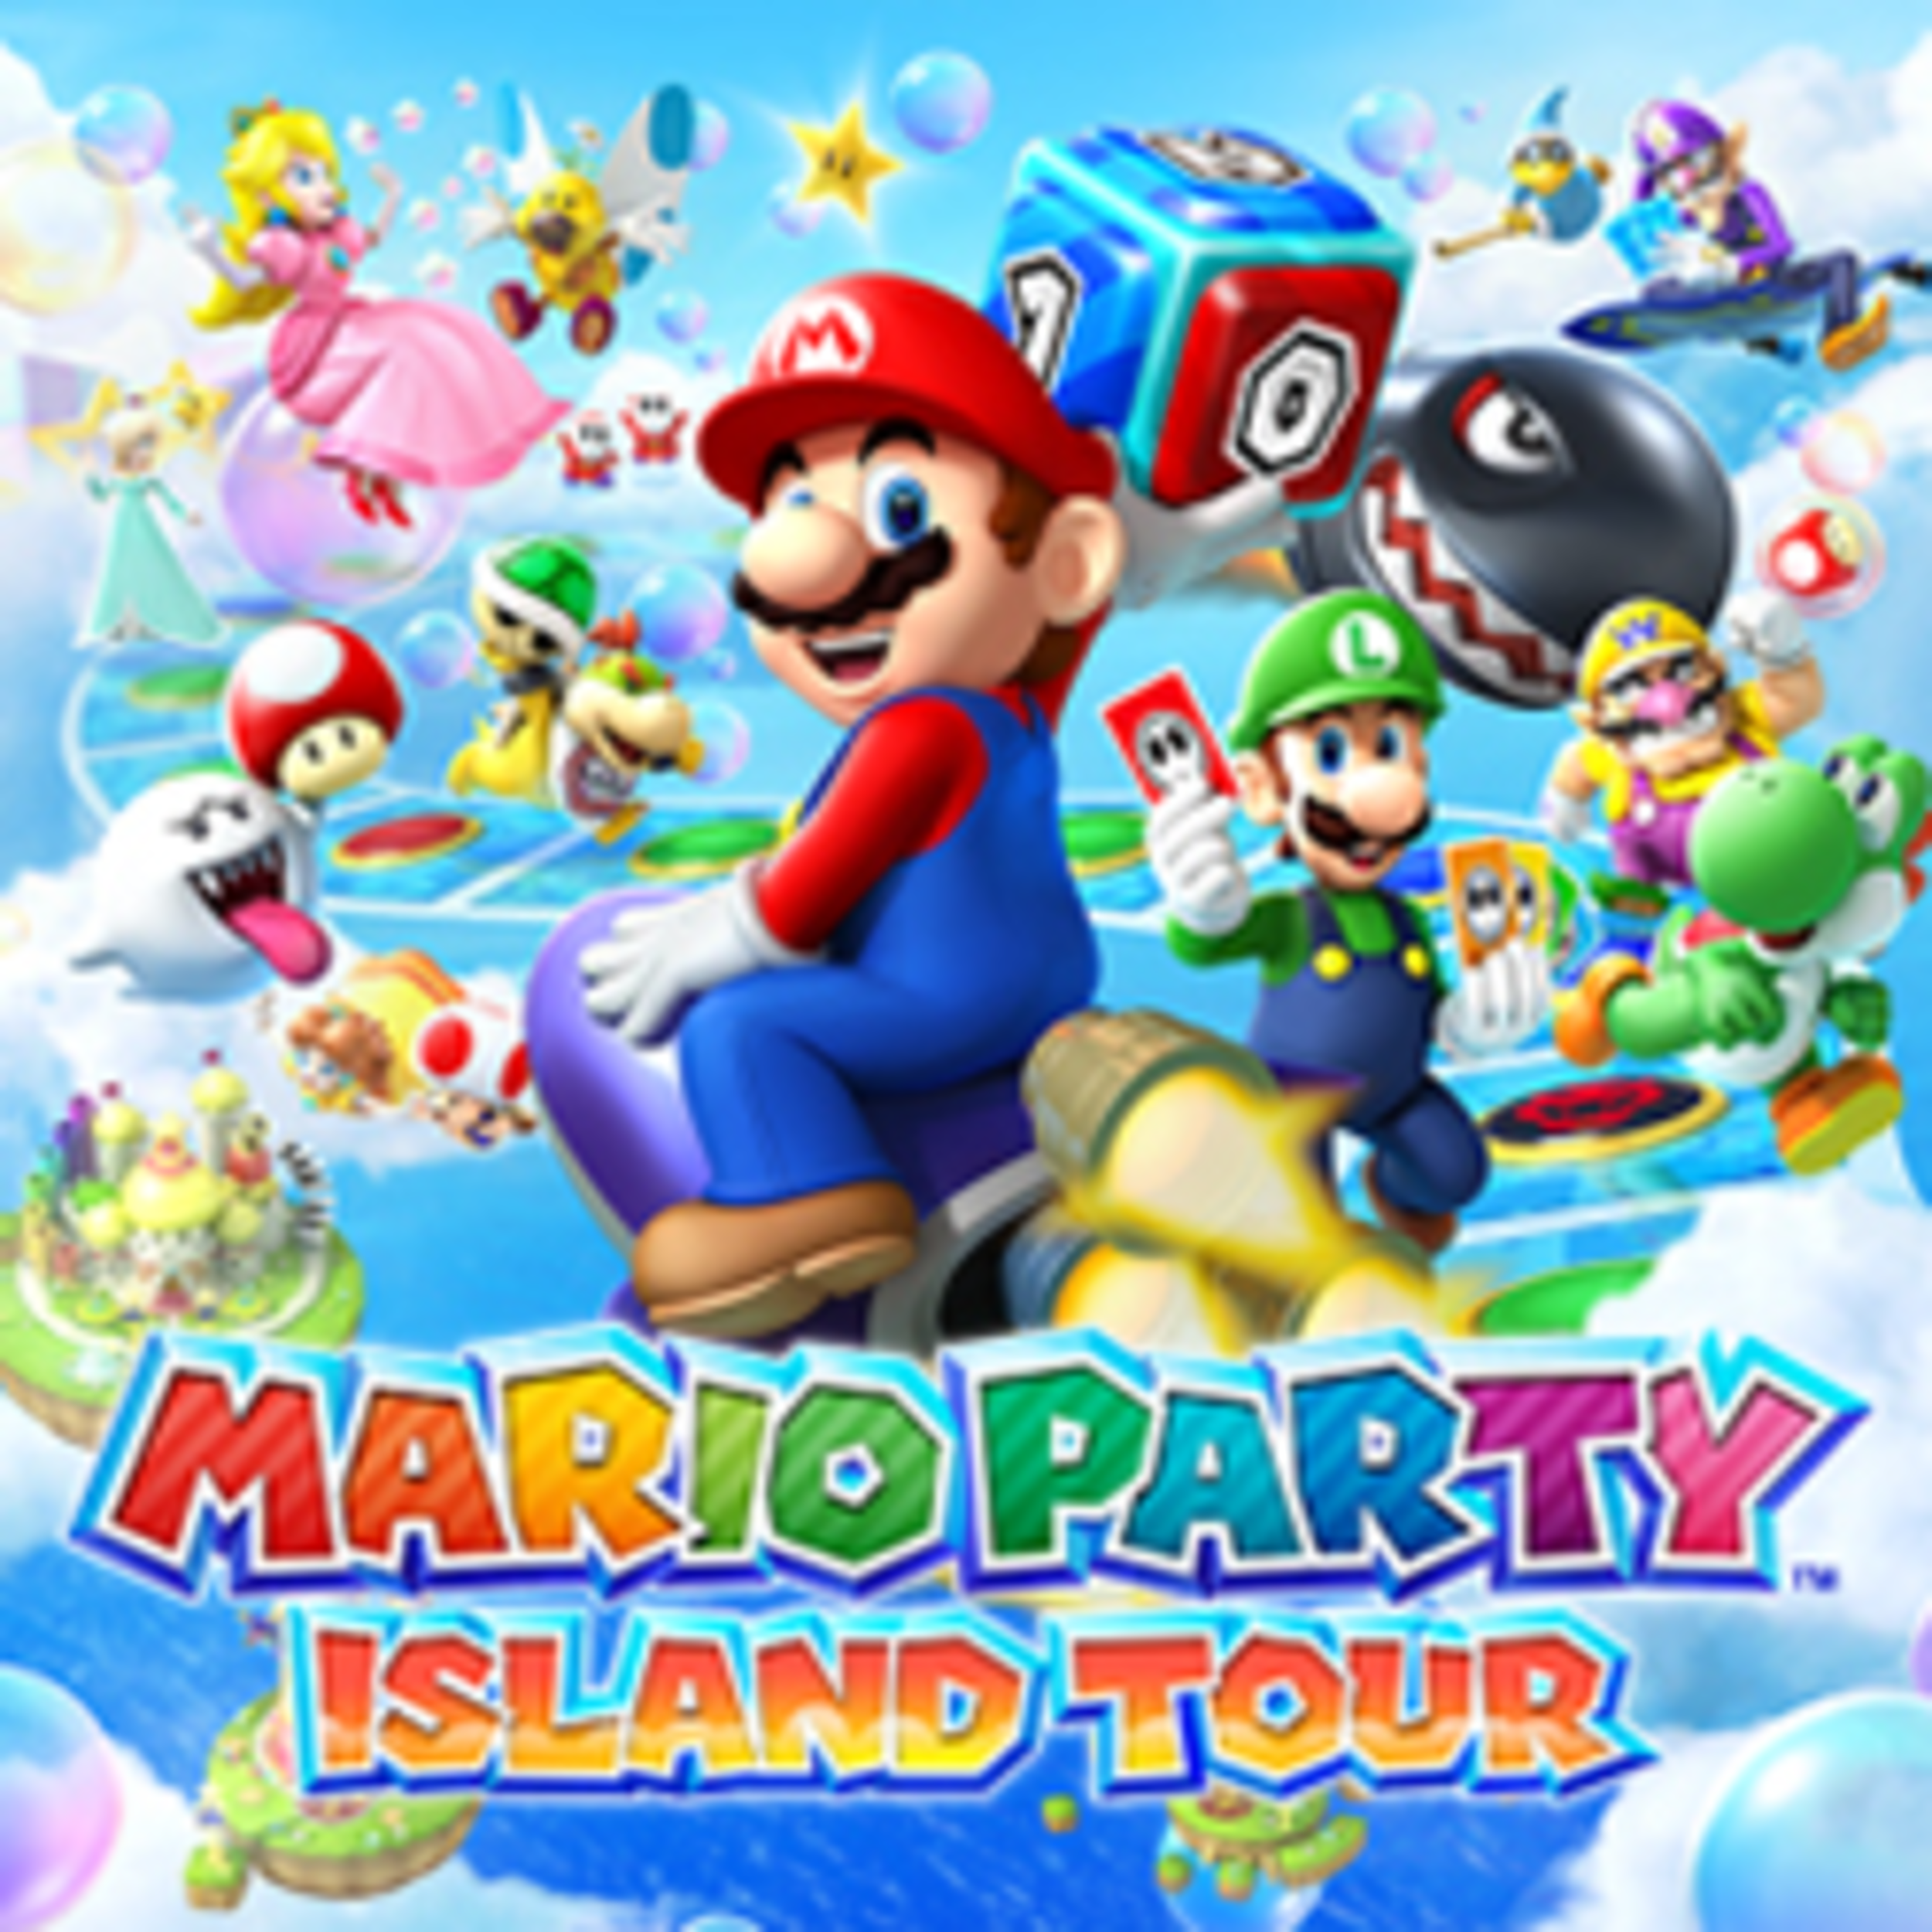 <p>Unfortunately, the <em>Mario Party</em> games didn't improve when Nintendo upped its portable game with its 3DS series. Since it failed to learn that the other portable party games wouldn't work on a console you can fit in your pocket, it goes even further.<br><br>The game has some of the worst controls of any Mario game in history and even blander mini-games that feel like they were designed for preschool kids still developing their hand-eye coordination. The multiplayer connections are improved, but they don't go online, and there's really nothing for four people to do at all, let alone one player with no friends. </p><p><a href='https://www.msn.com/en-us/community/channel/vid-cj9pqbr0vn9in2b6ddcd8sfgpfq6x6utp44fssrv6mc2gtybw0us'>Follow us on MSN to see more of our exclusive entertainment content.</a></p>